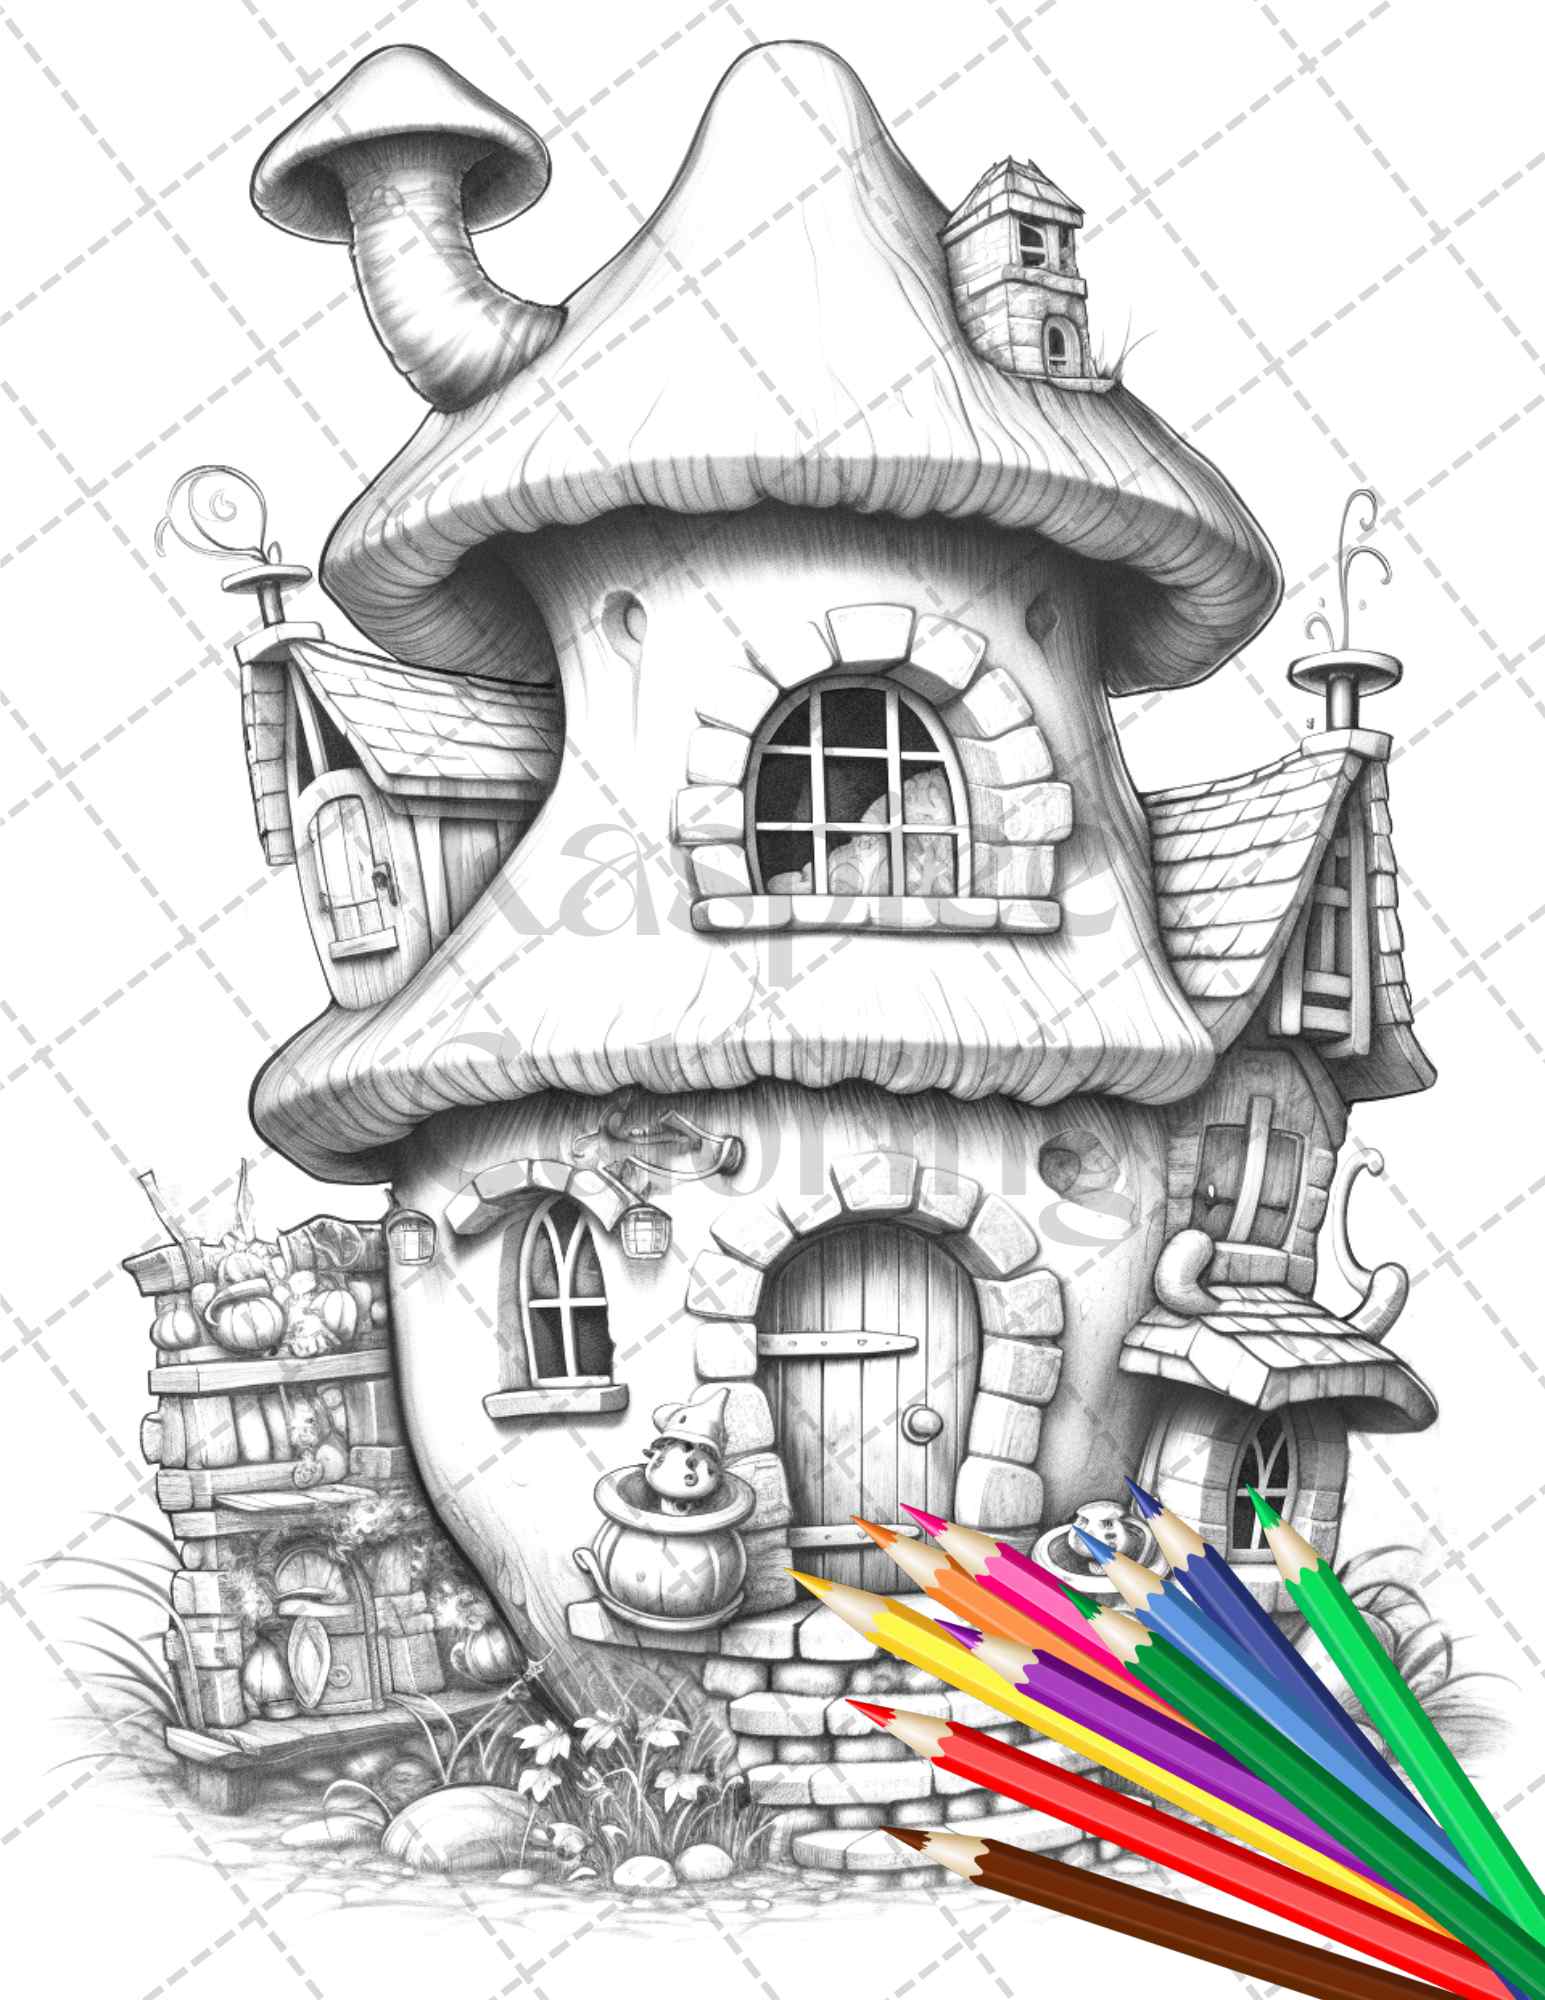 40 Stone Cottage Houses Grayscale Coloring Pages Printable for Adults, PDF File Instant Download - raspiee